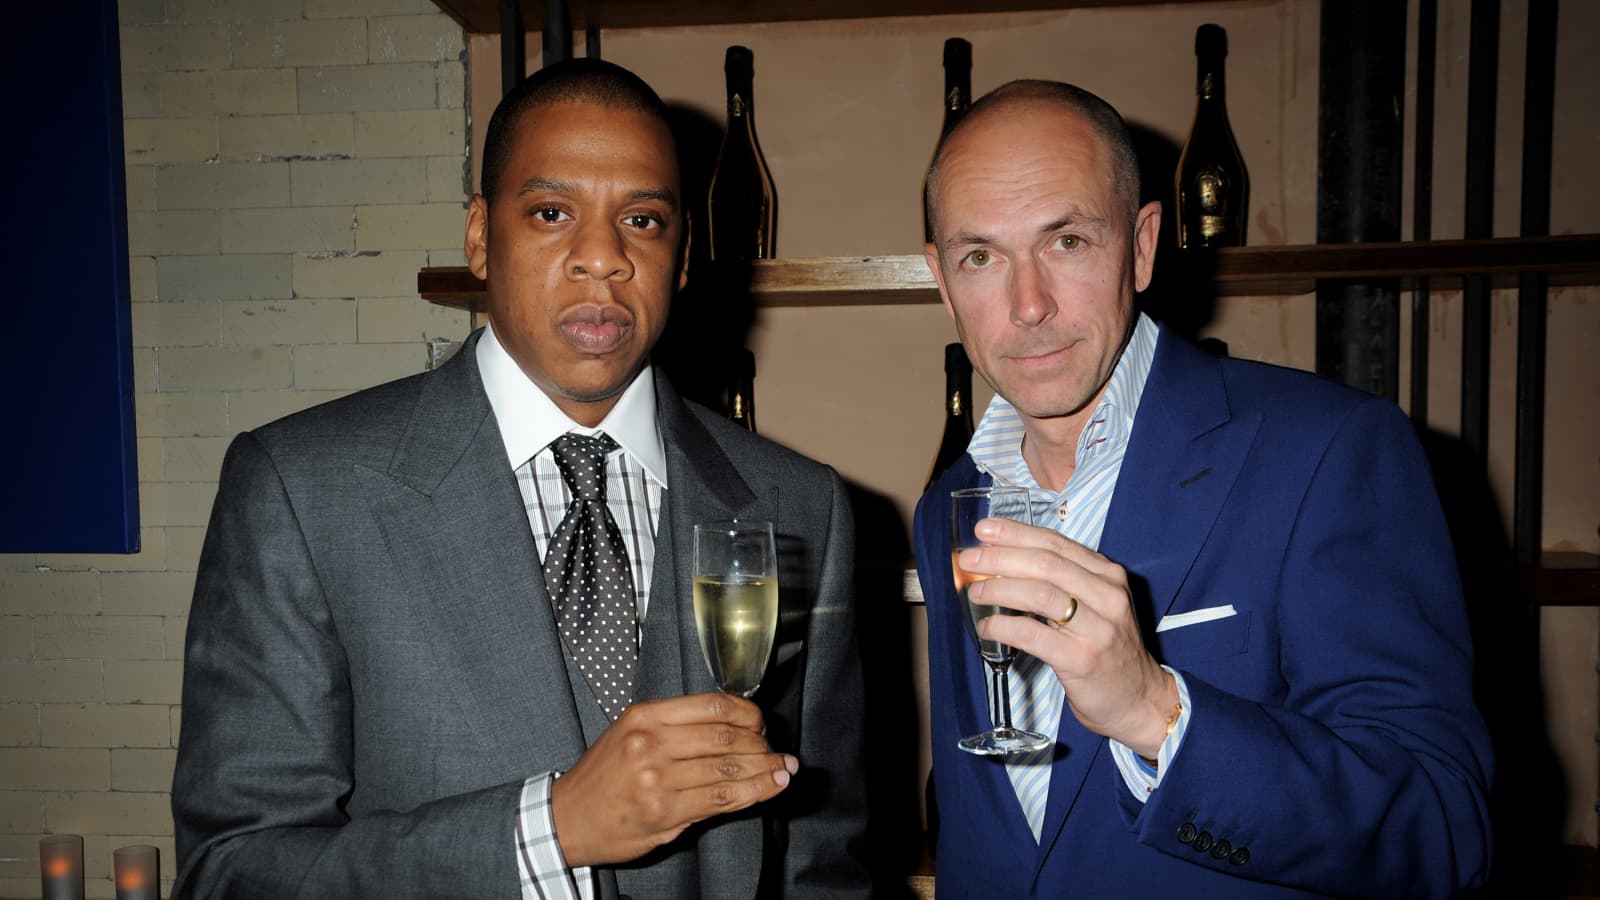 Jay-Z's New Champagne Costs $850 a Bottle: Armand de Brignac A2 - Bloomberg